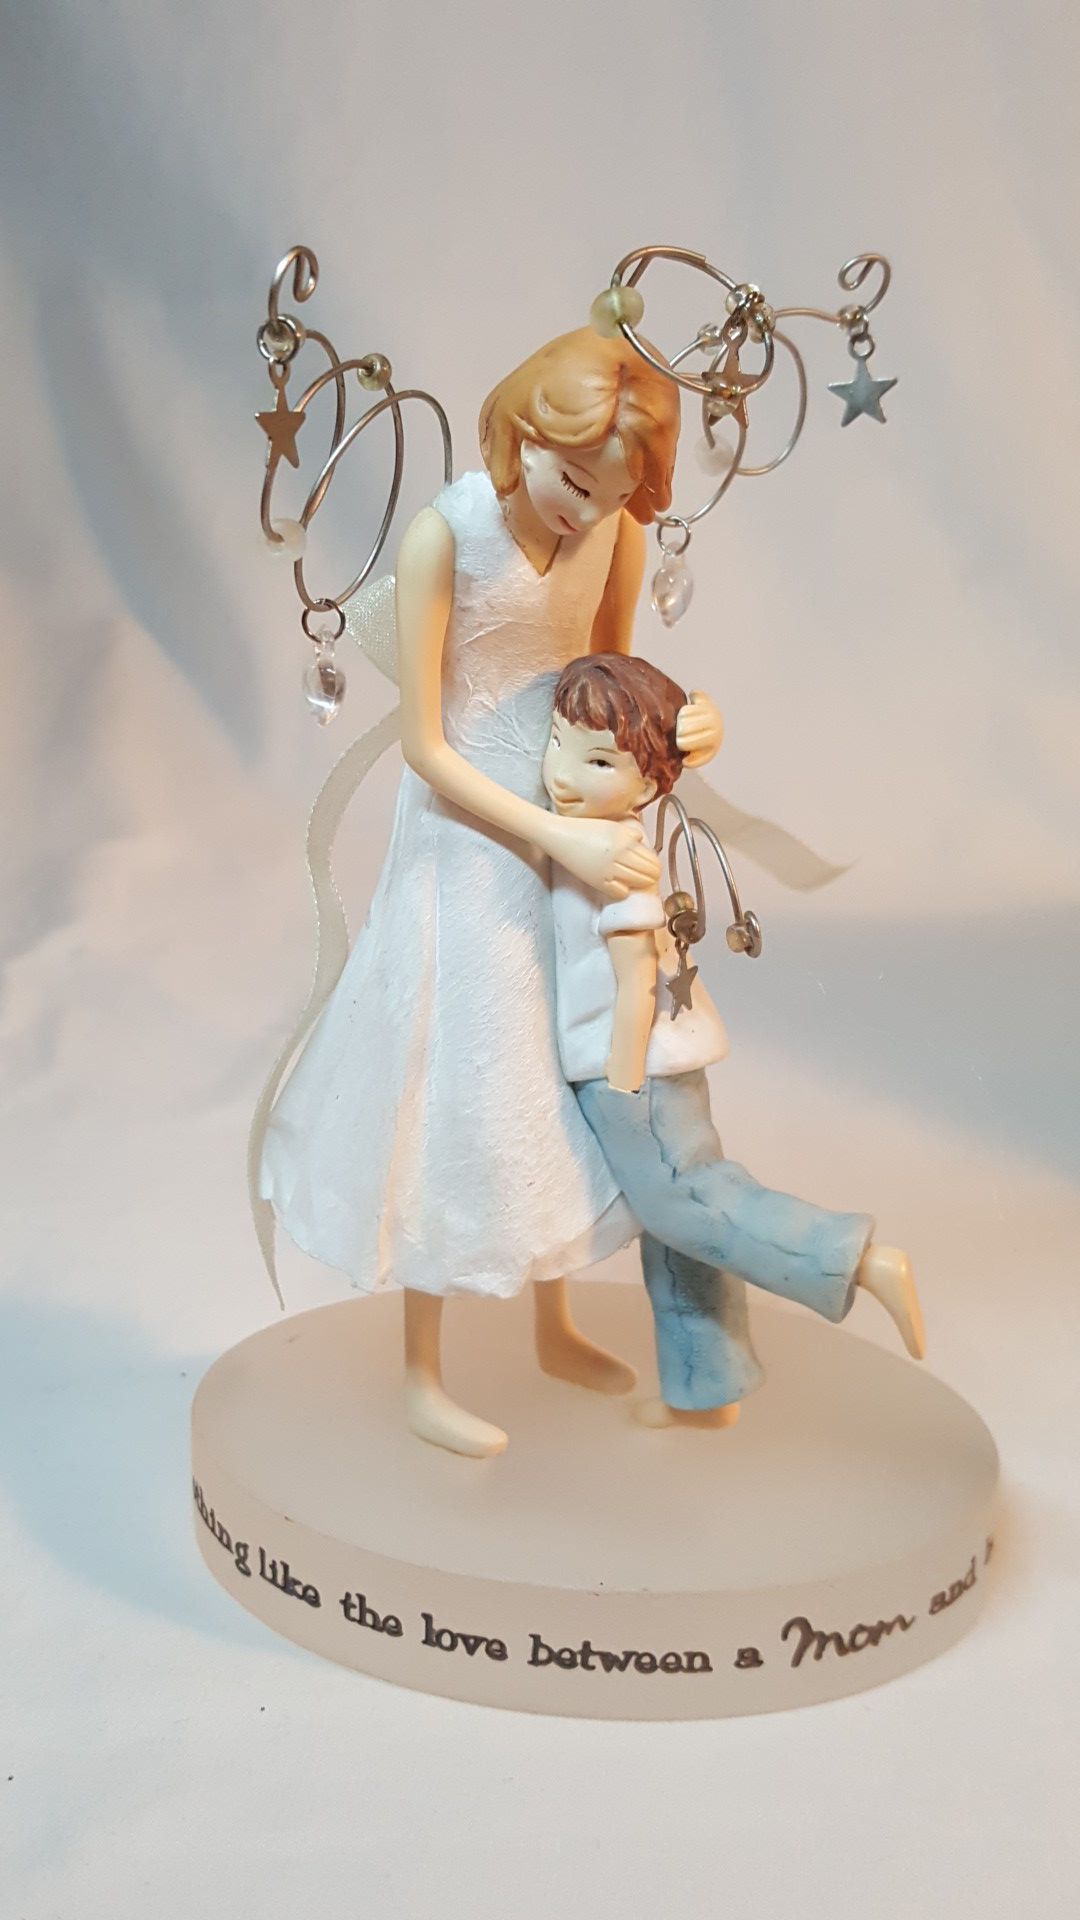 Mother and Son Figurine